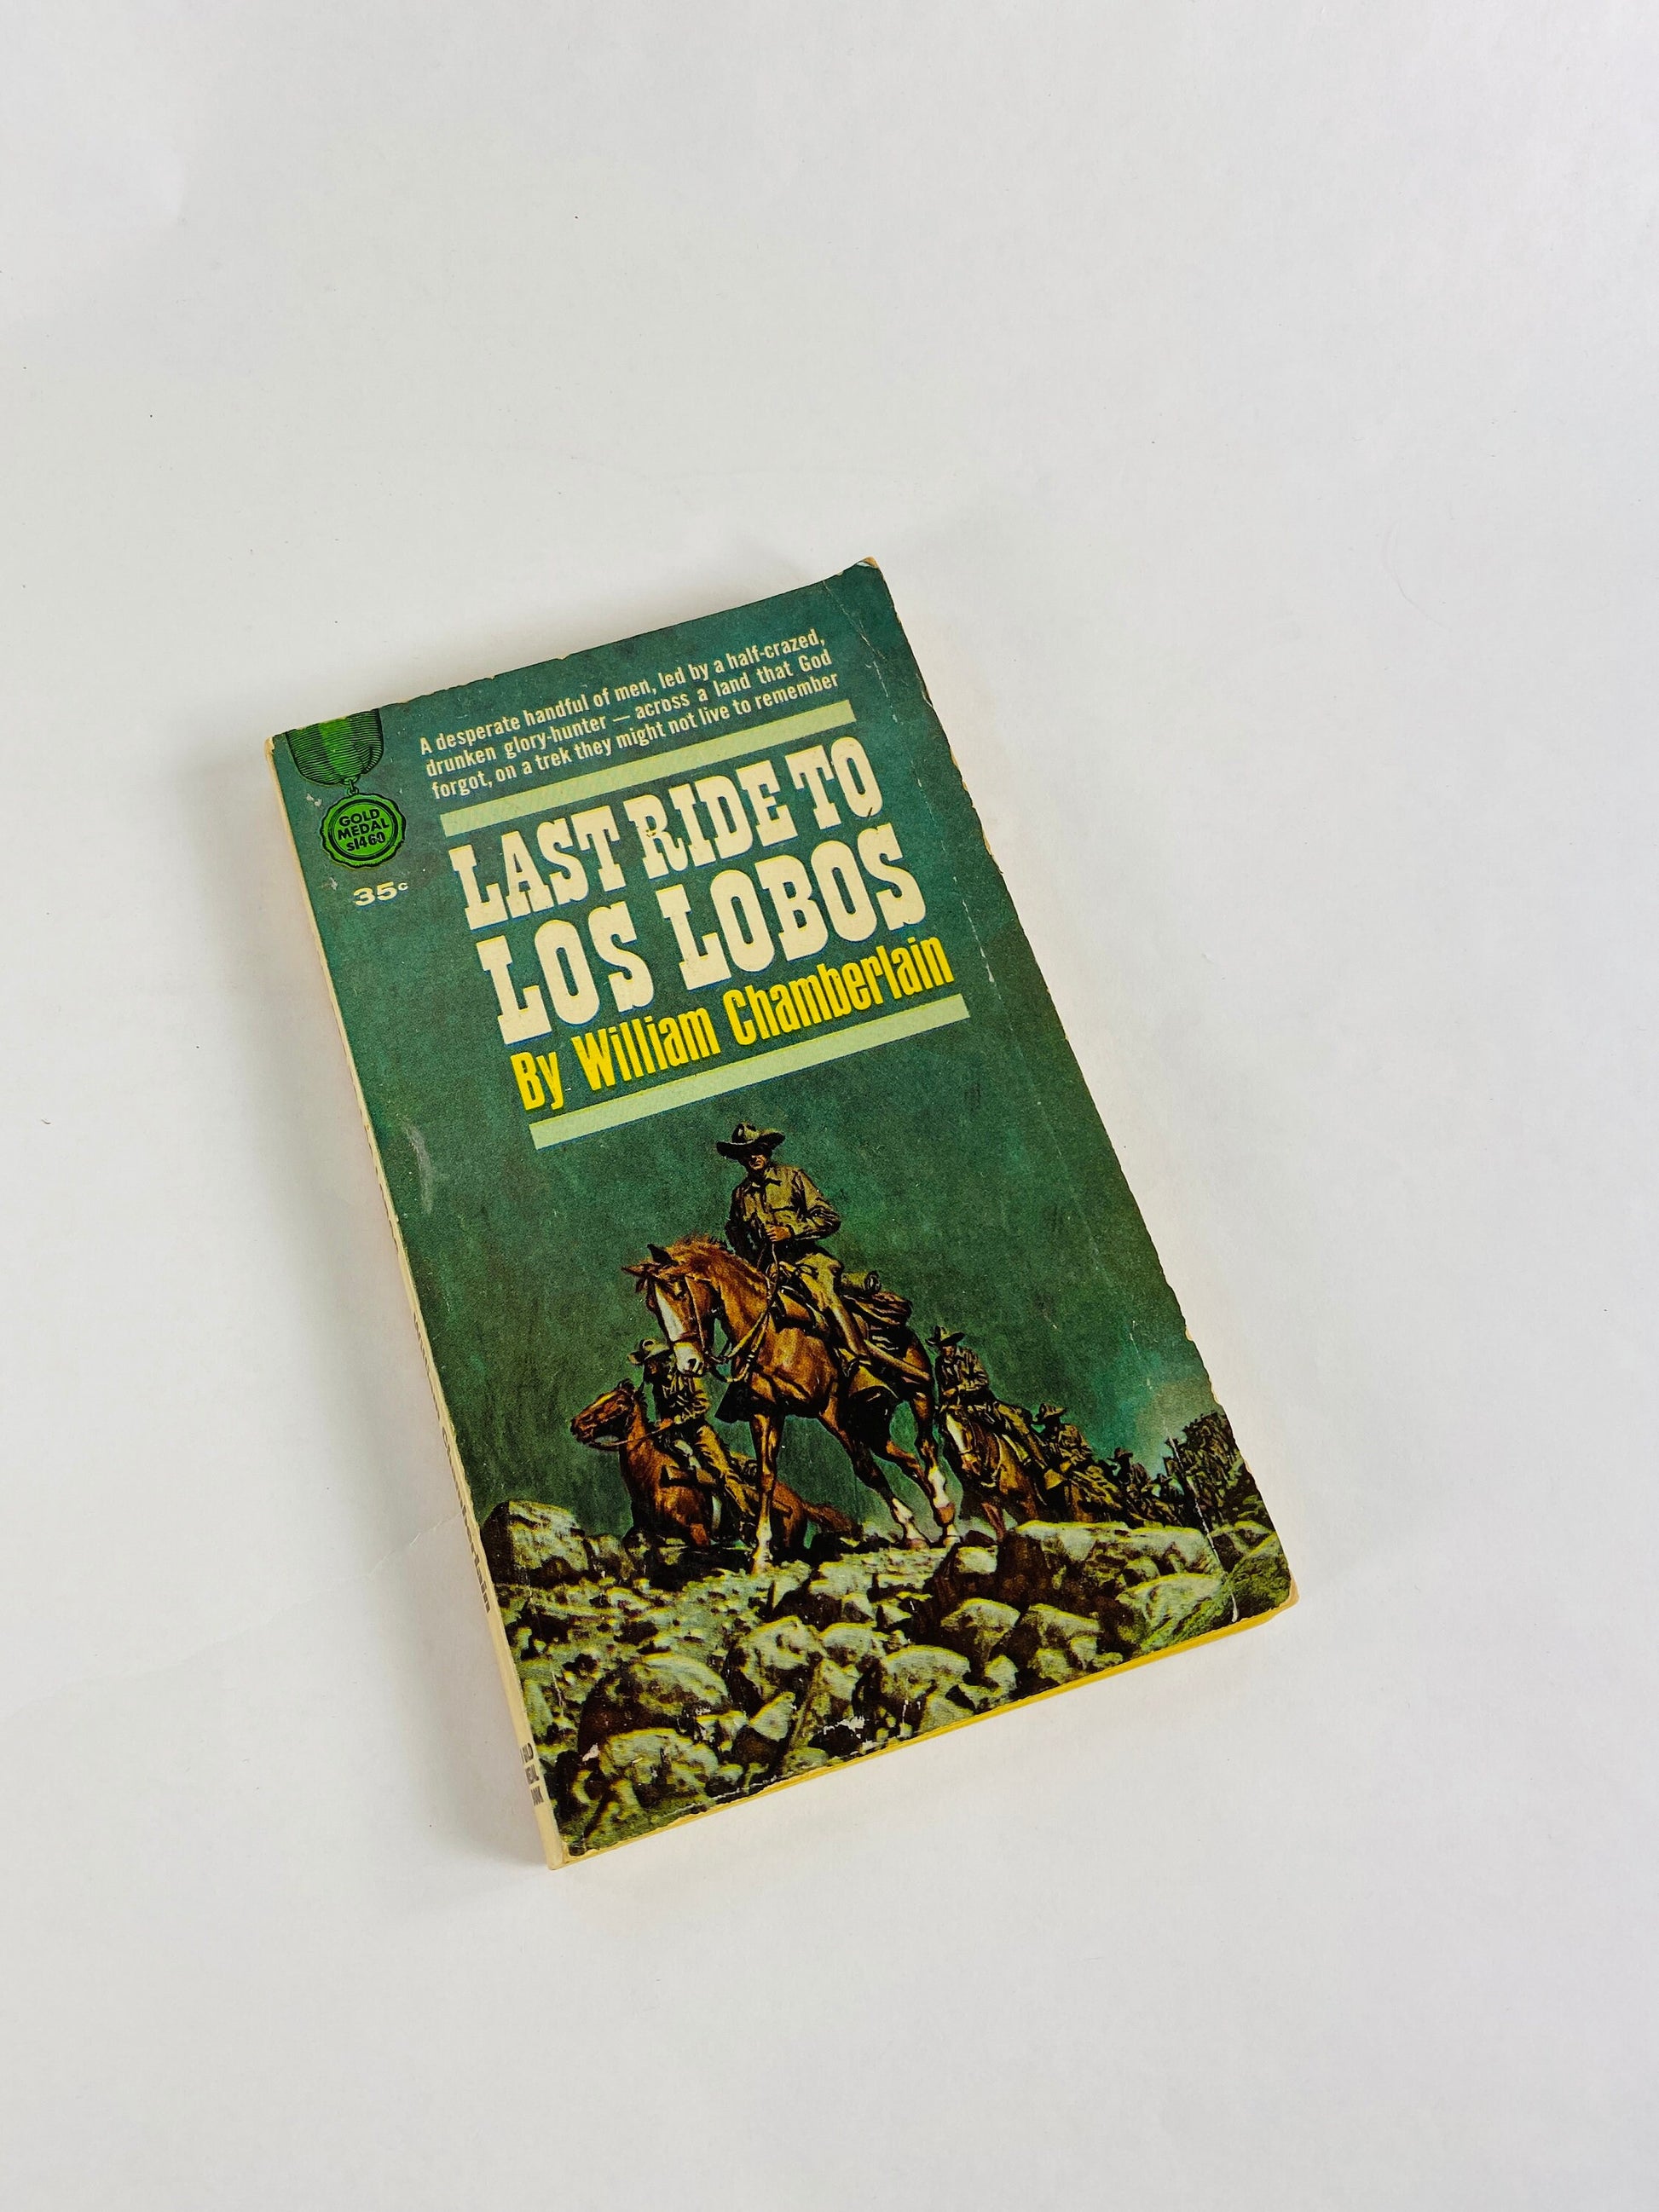 1964 Last Ride to Los Lobos Vintage Western paperback book by William Chamberlain about a man with an office job thrown on the frontier